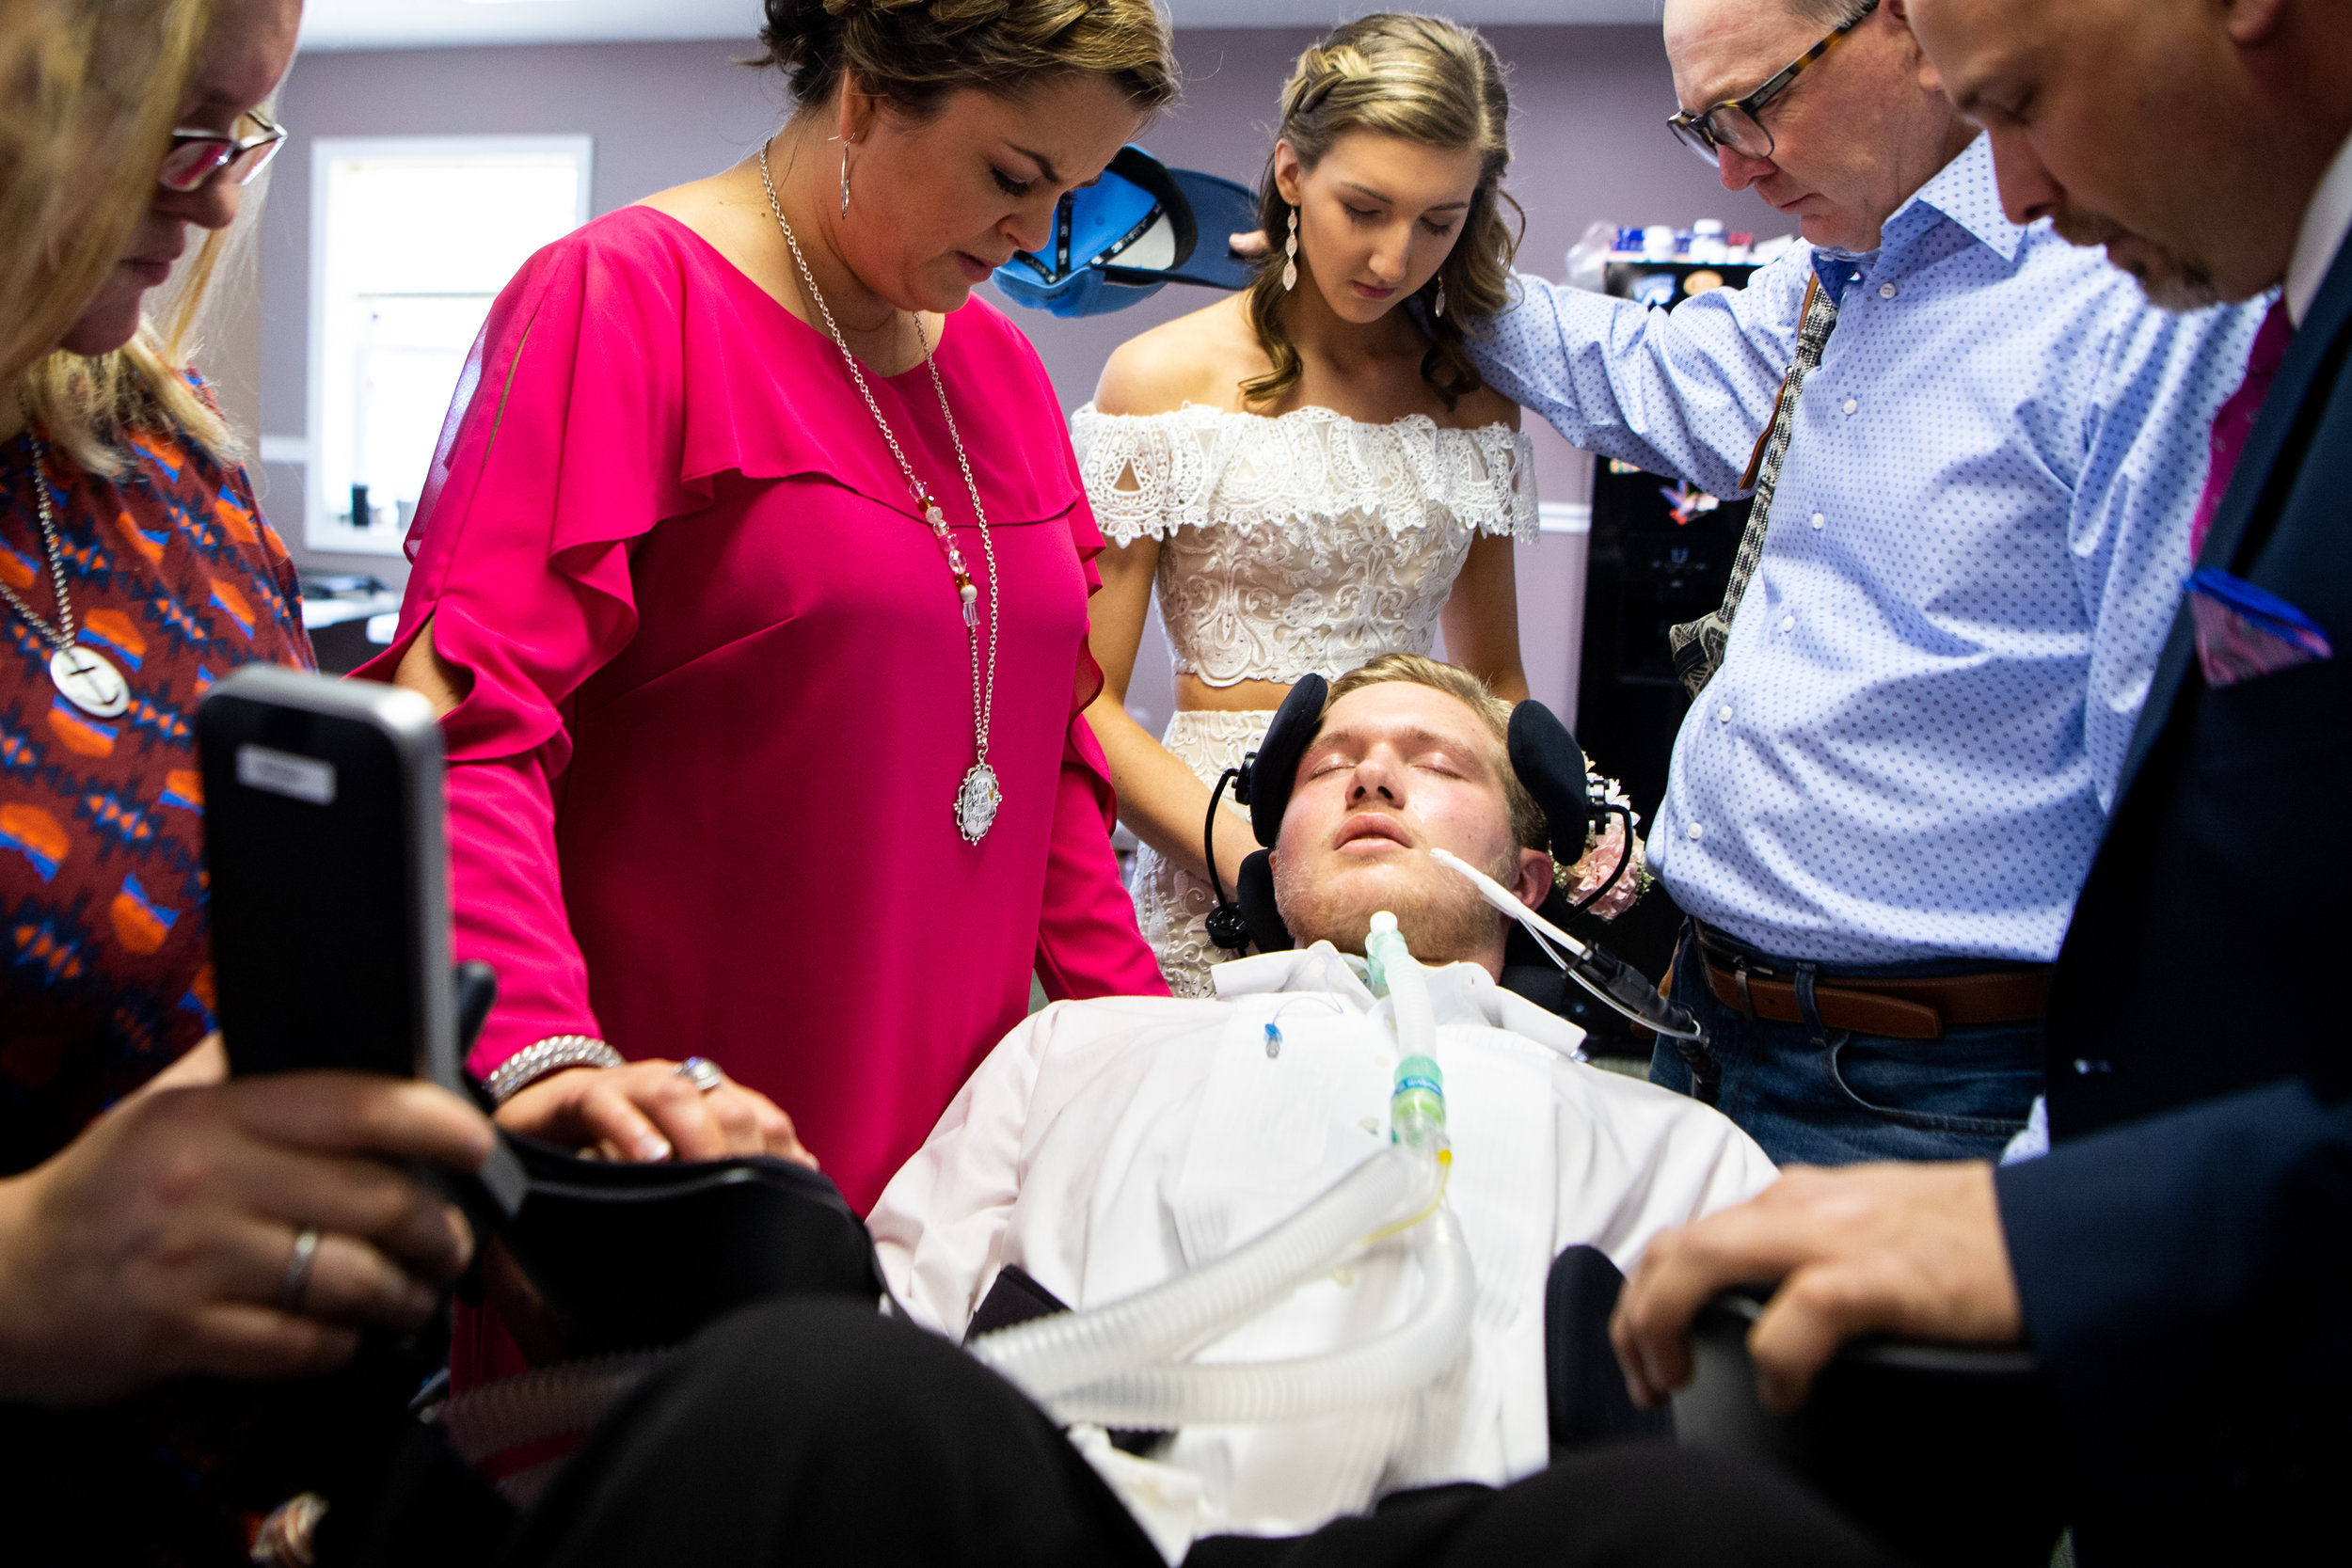  After a hard night and in pain, Jefferey Cox is prayed over by friends and family before going to prom with his girlfriend, Landry Clardy, at his home Saturday, April 20, 2019, in Erin, Tenn. Cox became paralyzed from the neck down during a preseaso